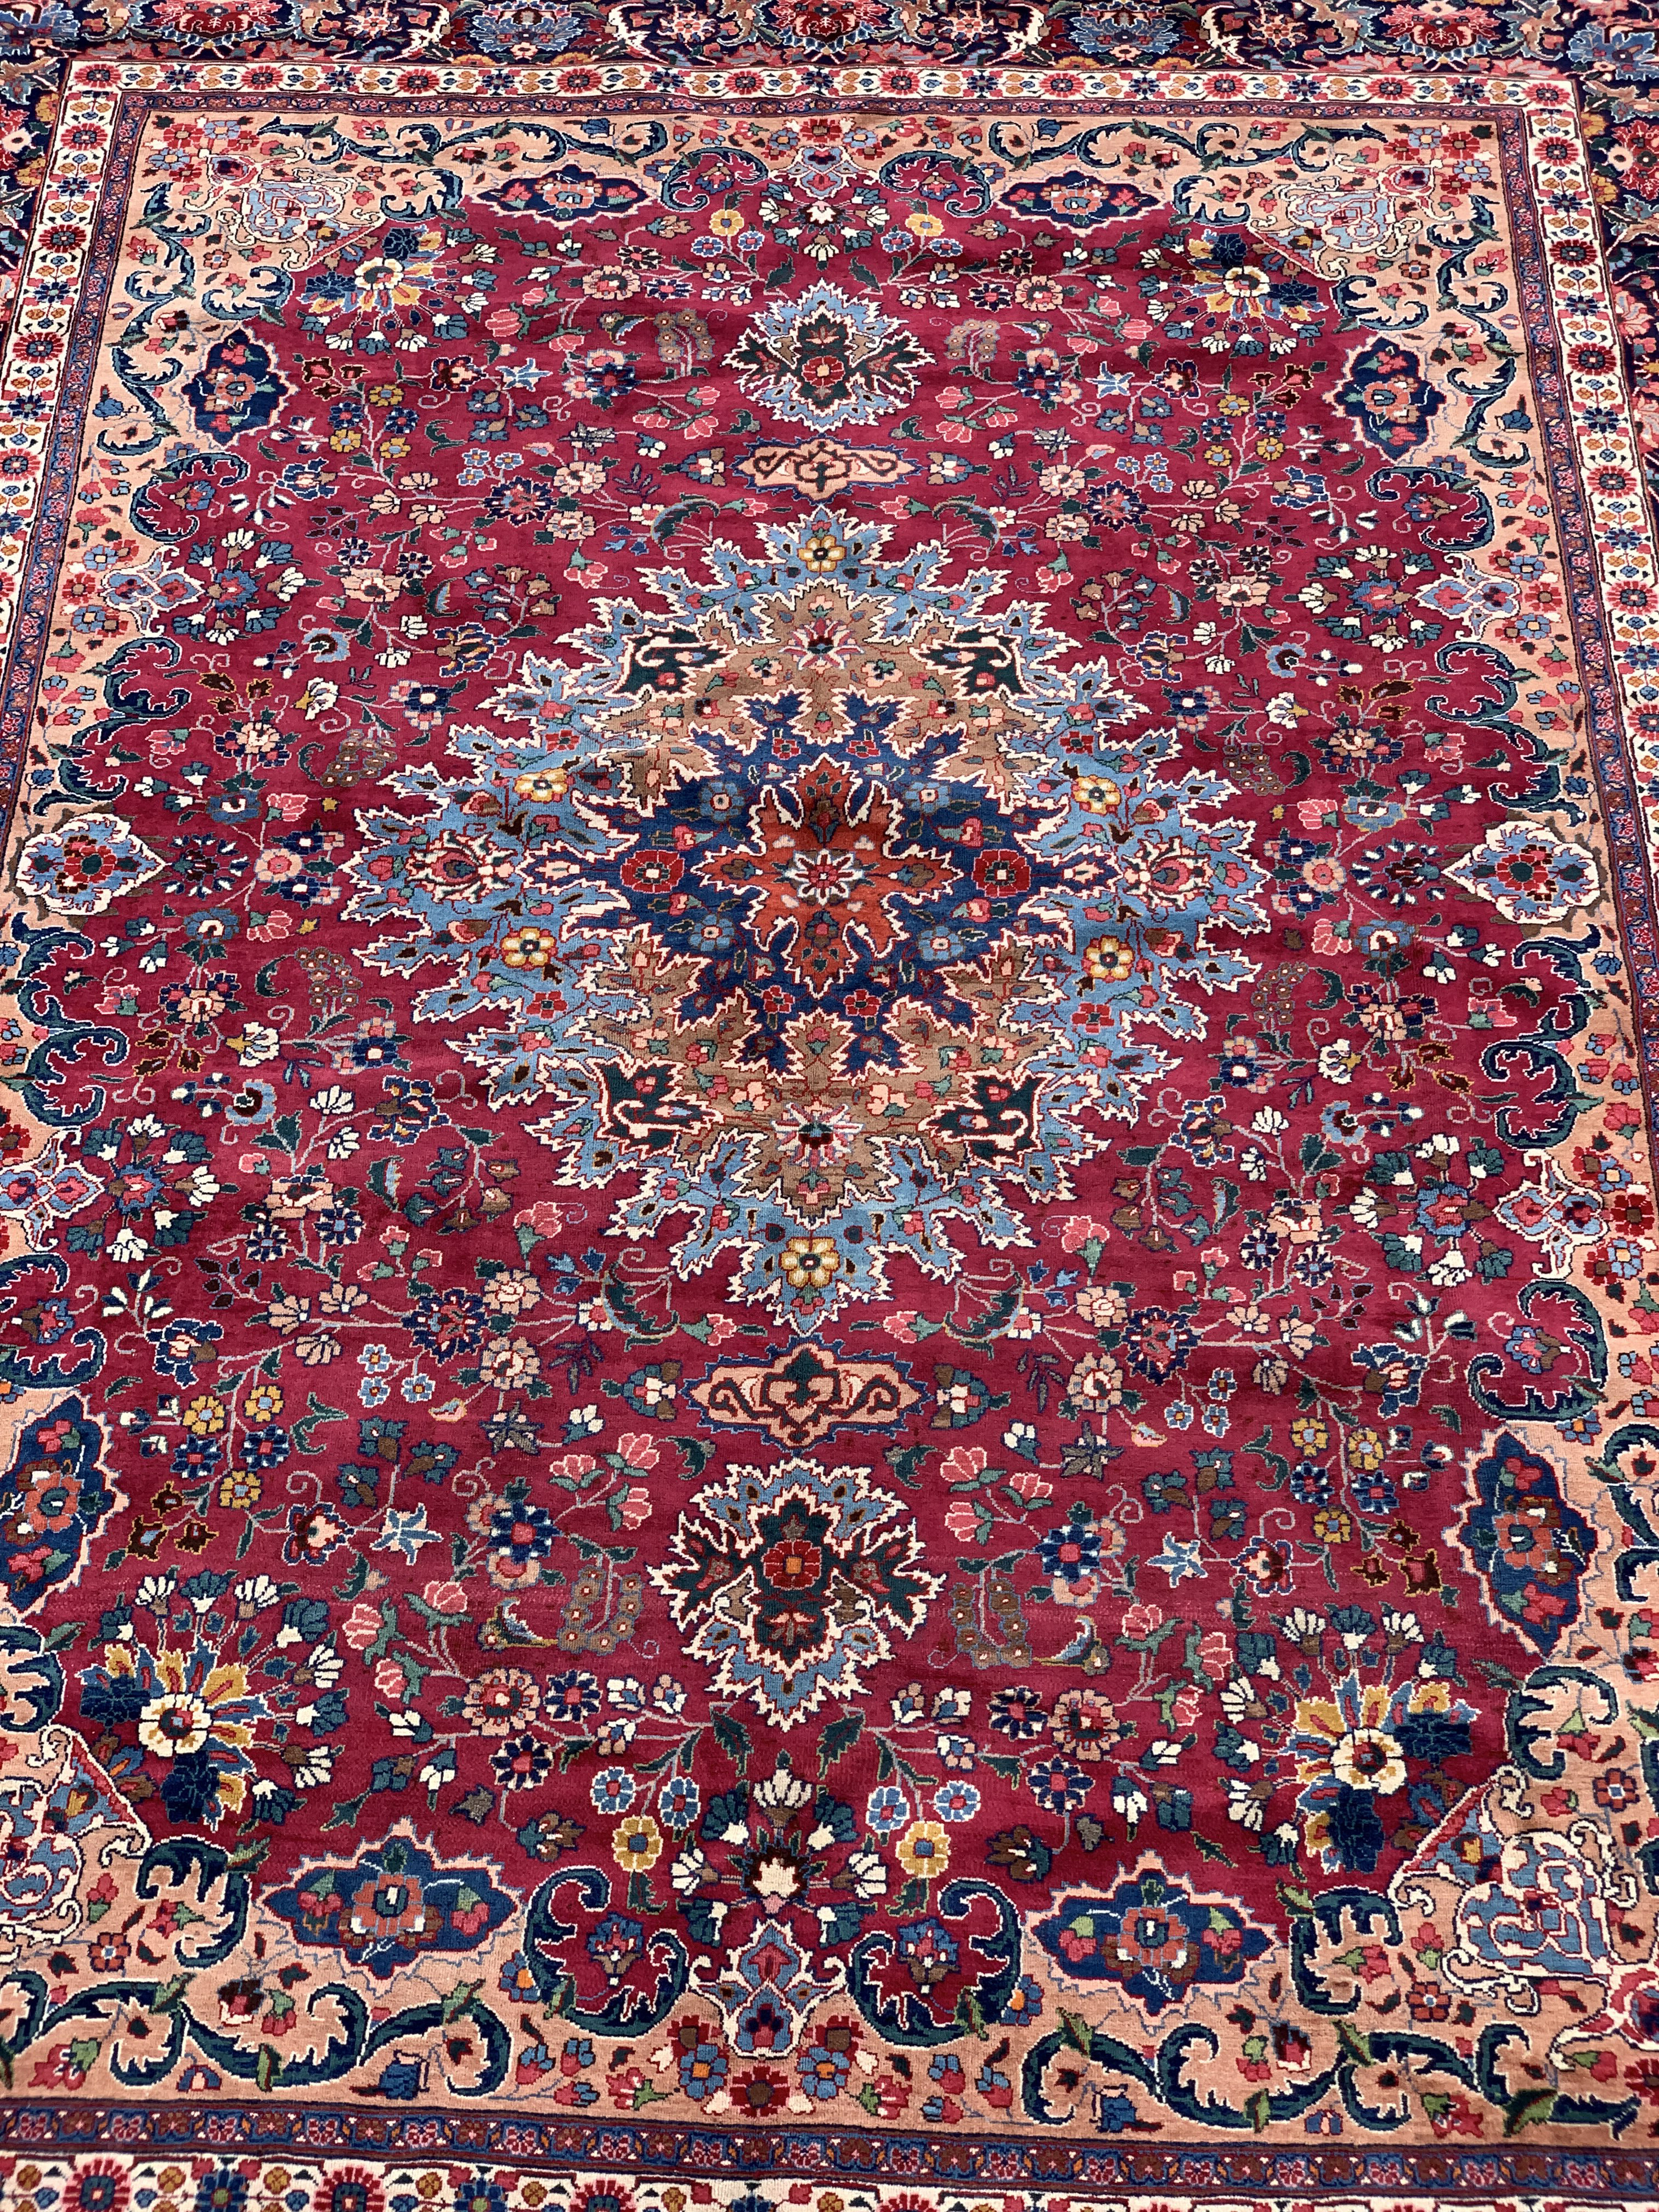 ORIENTAL RUG 9'8" X 13' SIGNED